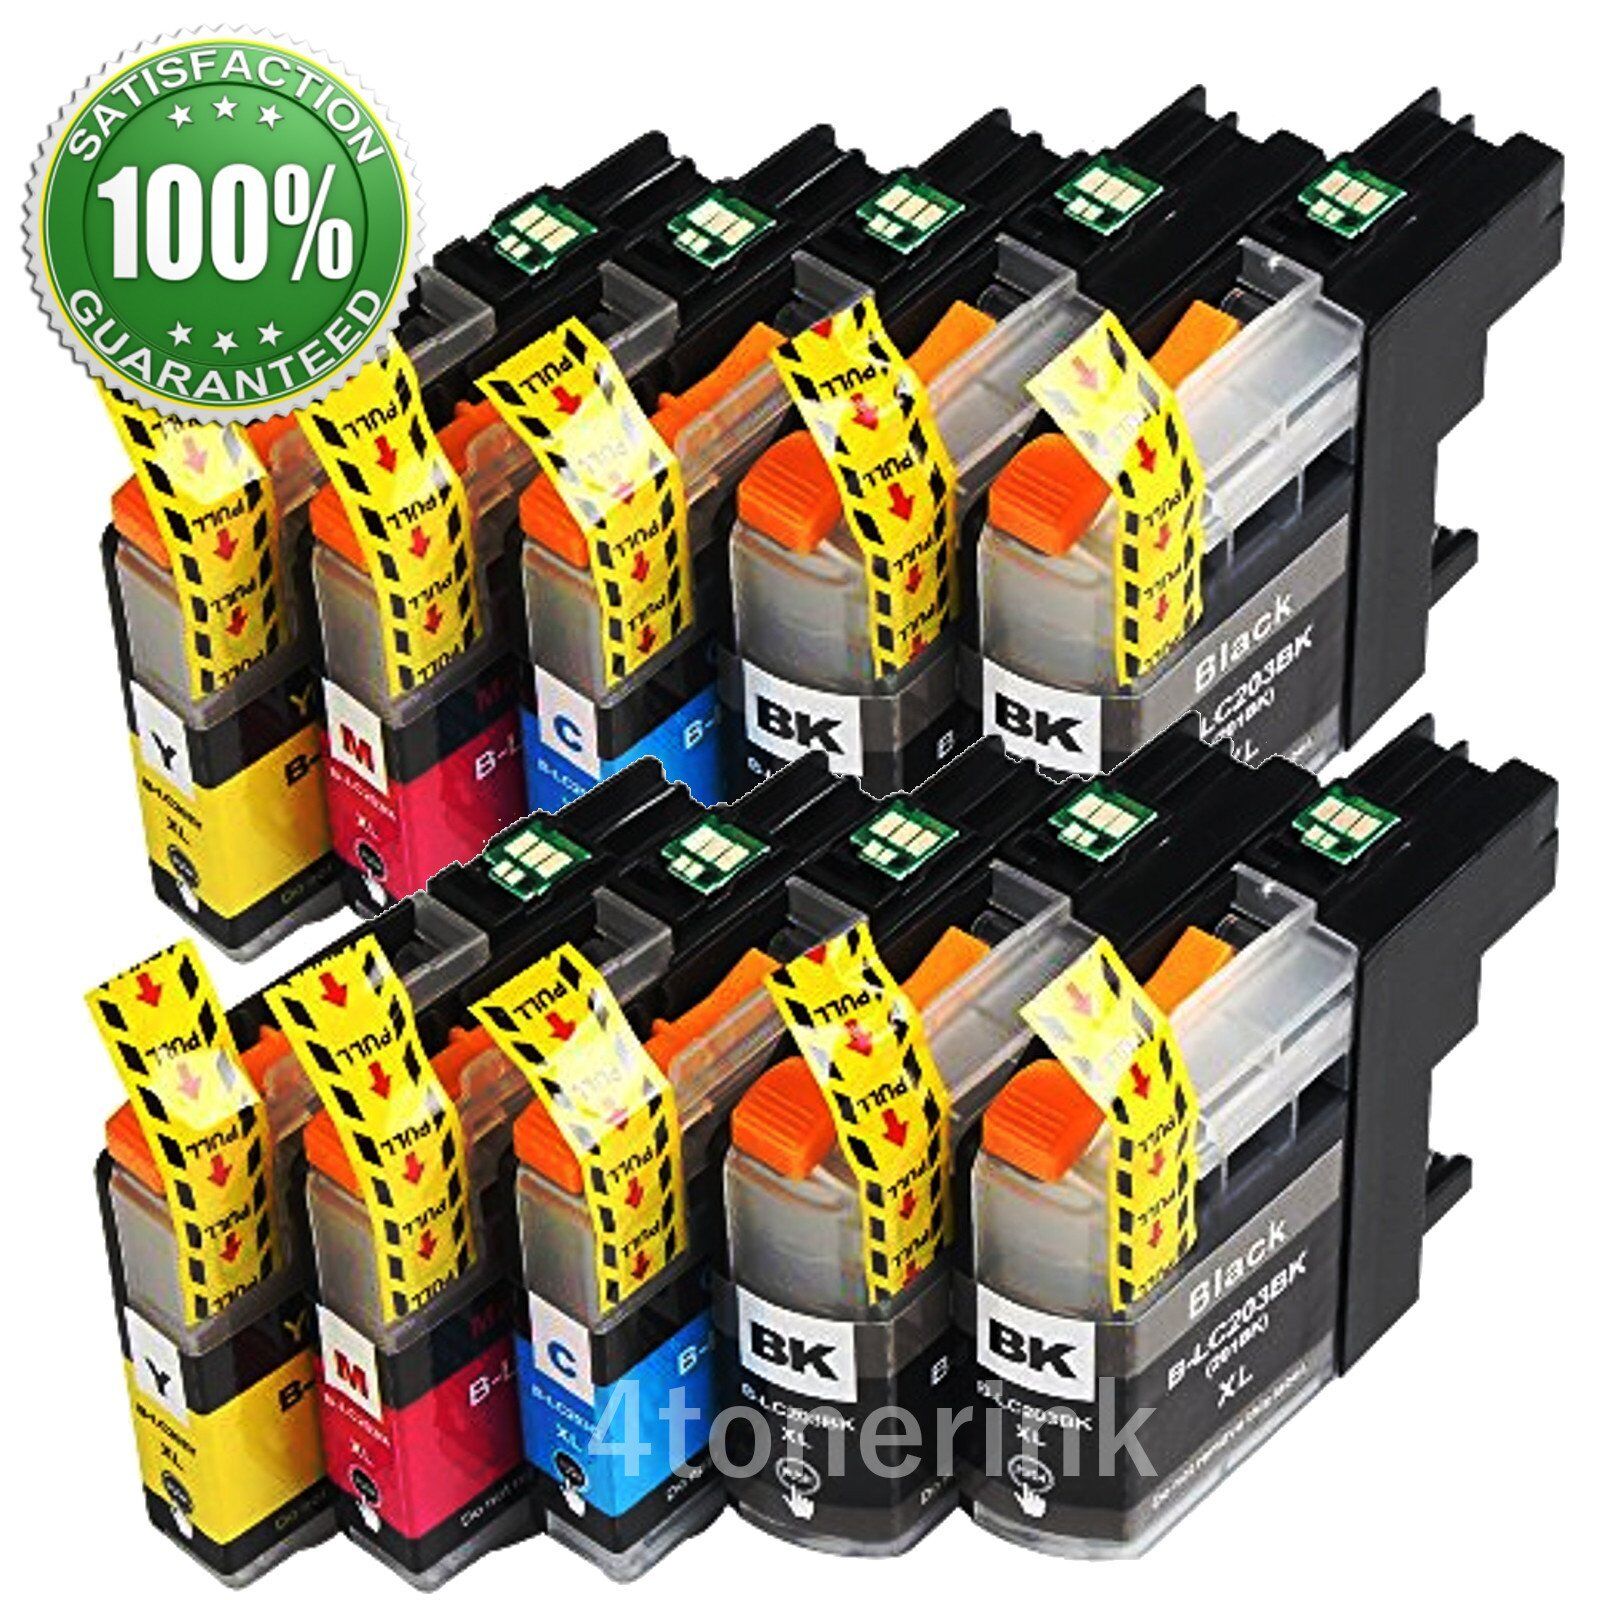 10PK LC203 XL High Yield Compatible Ink Cartridges For Brother MFC-J460DW J480DW